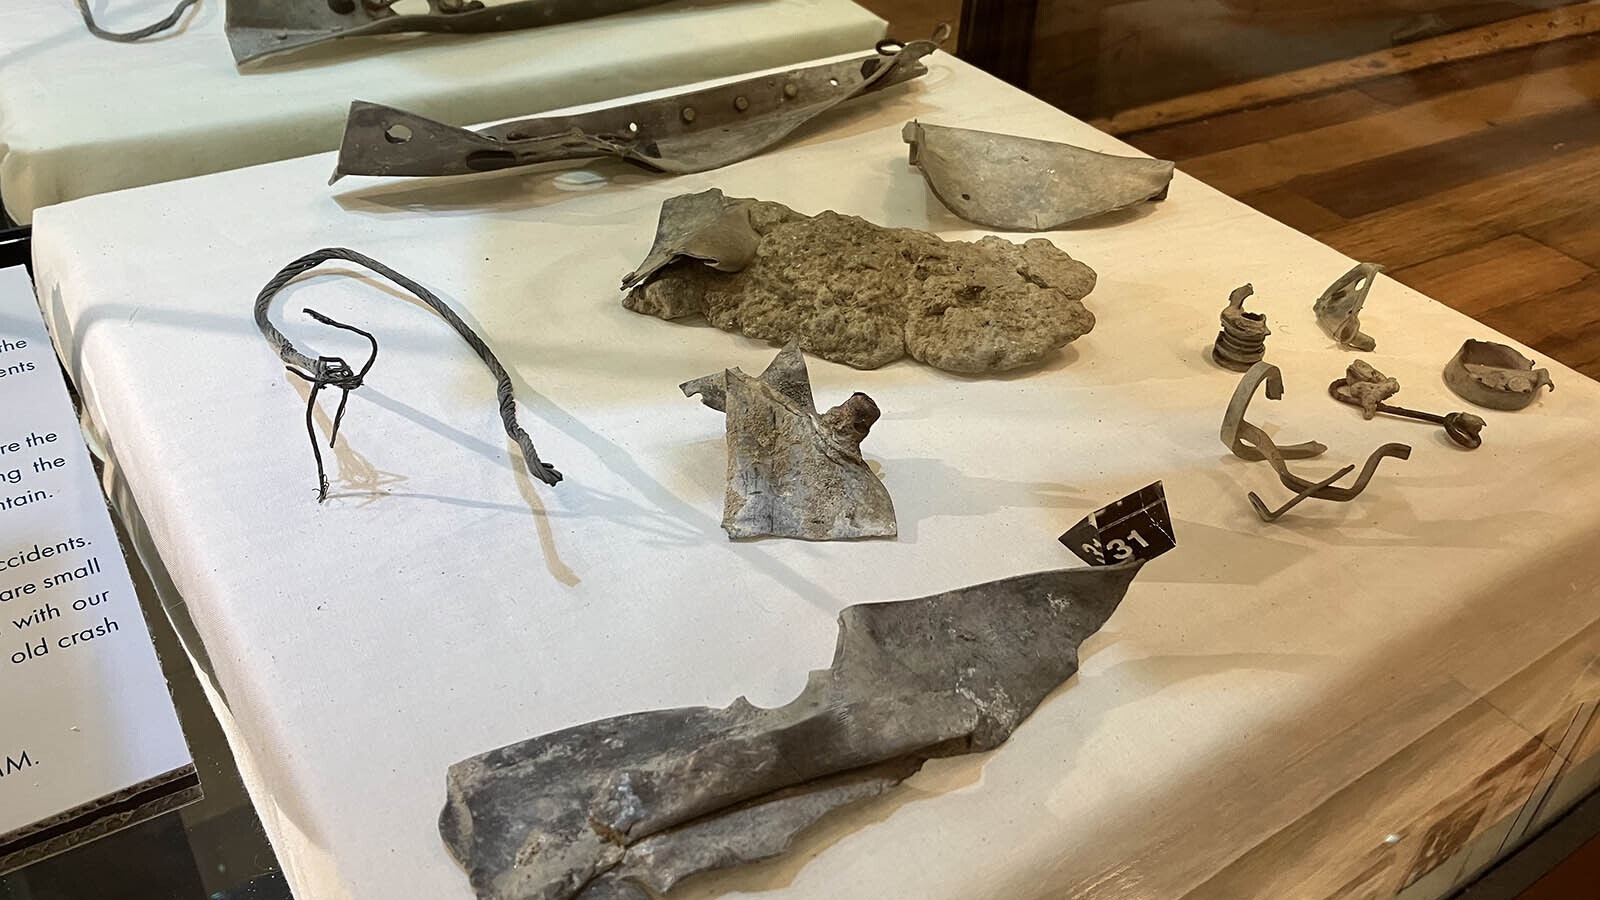 Small pieces of aircraft, remnants of some of the 90 crashes that occurred at Casper Army Air Base, are at the Wyoming Veterans Memorial Musuem.